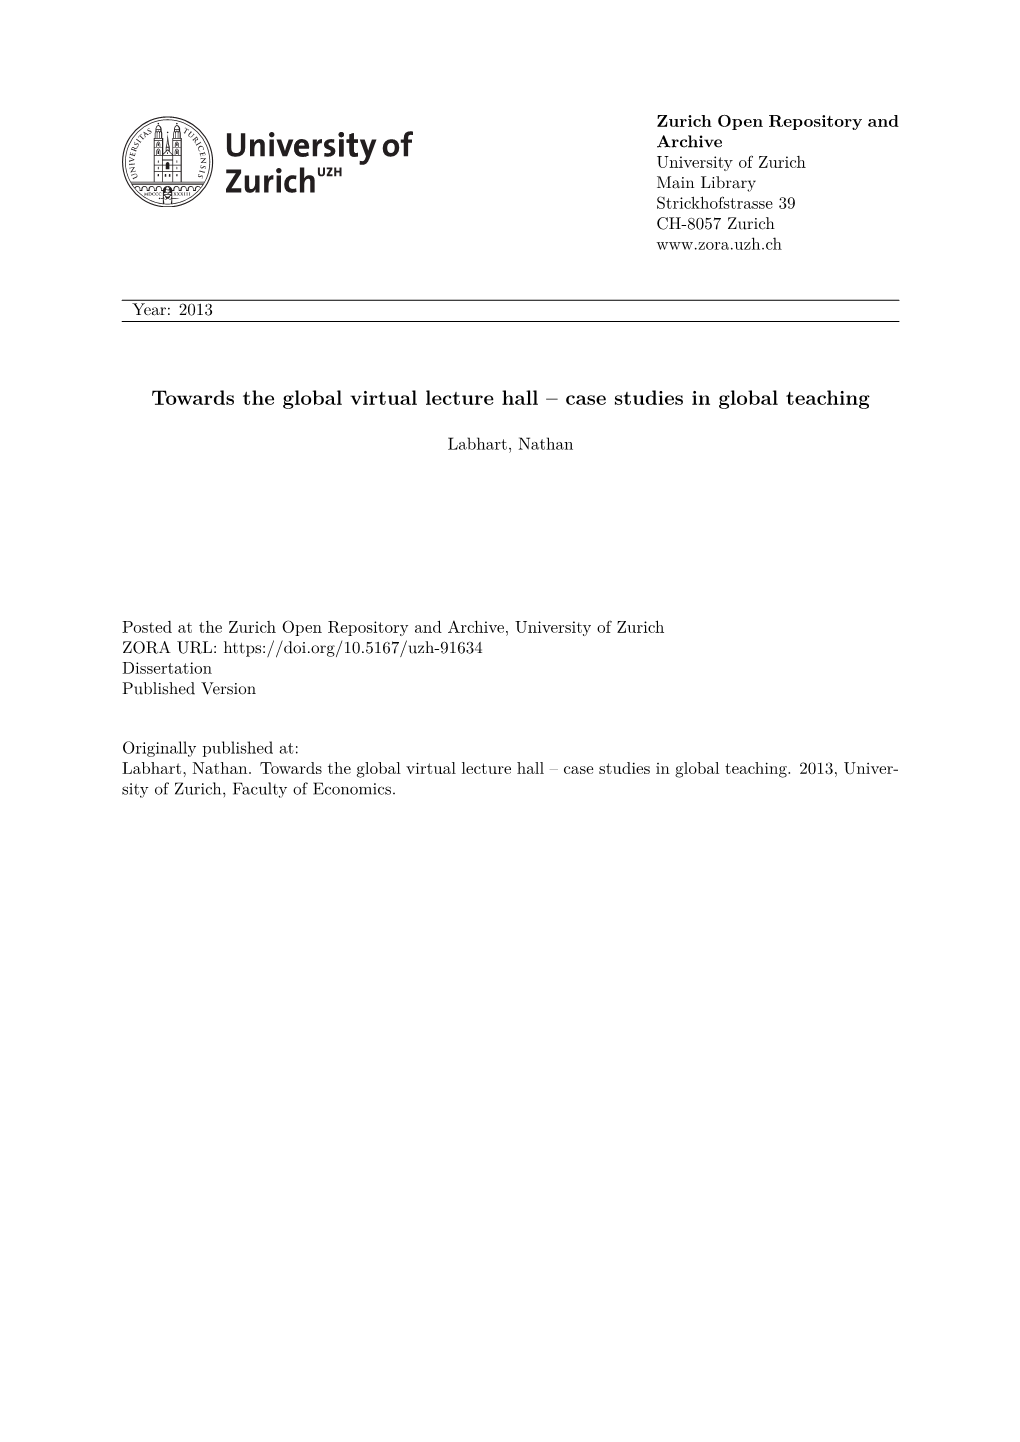 Towards the Global Virtual Lecture Hall: Case Studies in Global Teaching